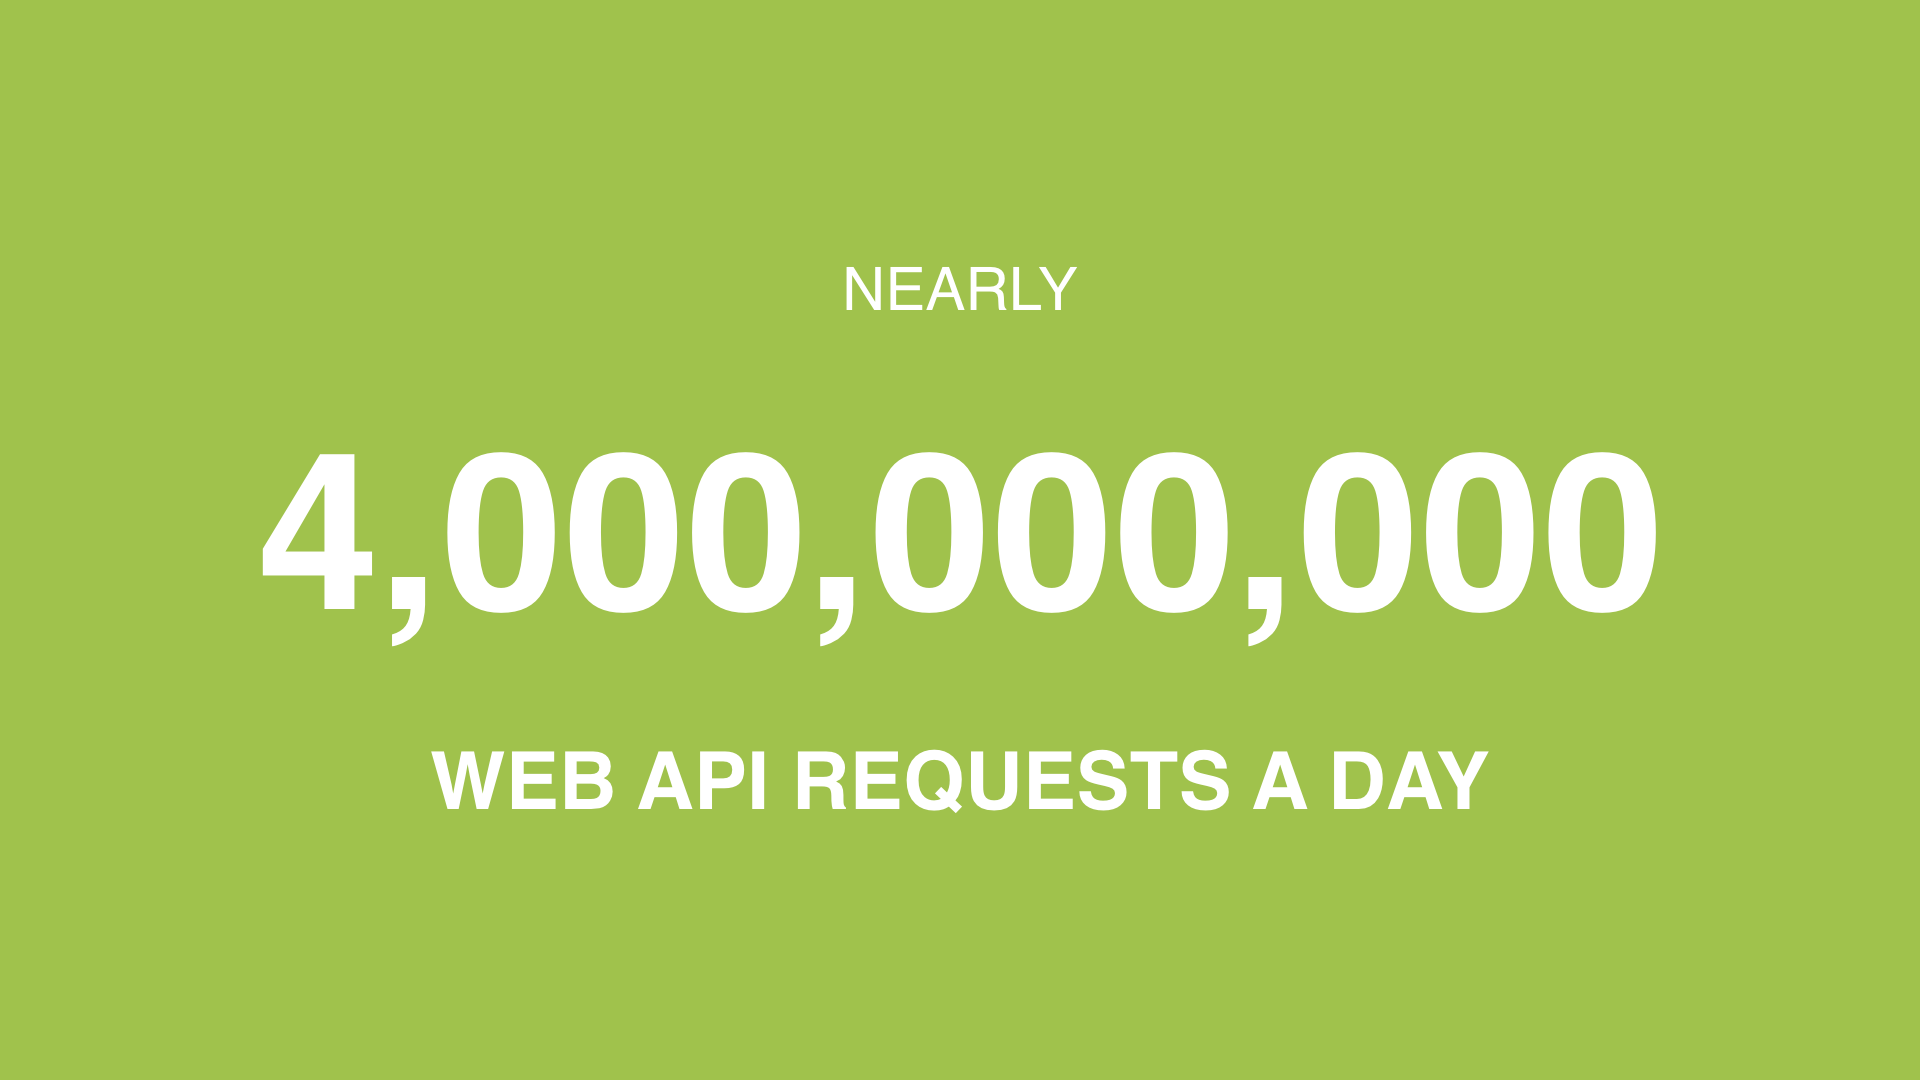 Text: Nearly 4,000,000,000 Web API requests a day